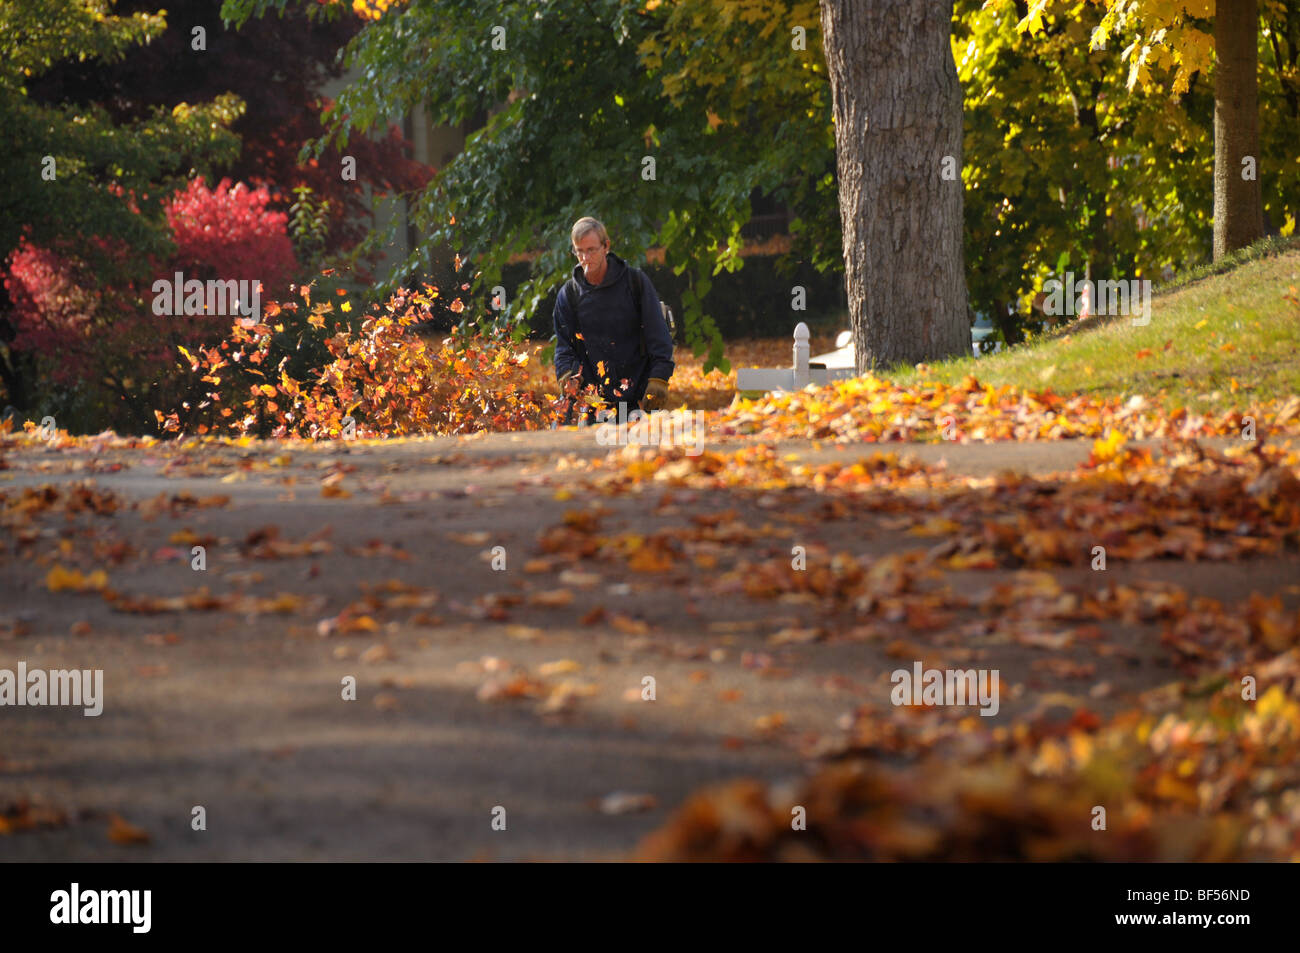 Groundskeeper using blower to gather autumn leafs. Stock Photo